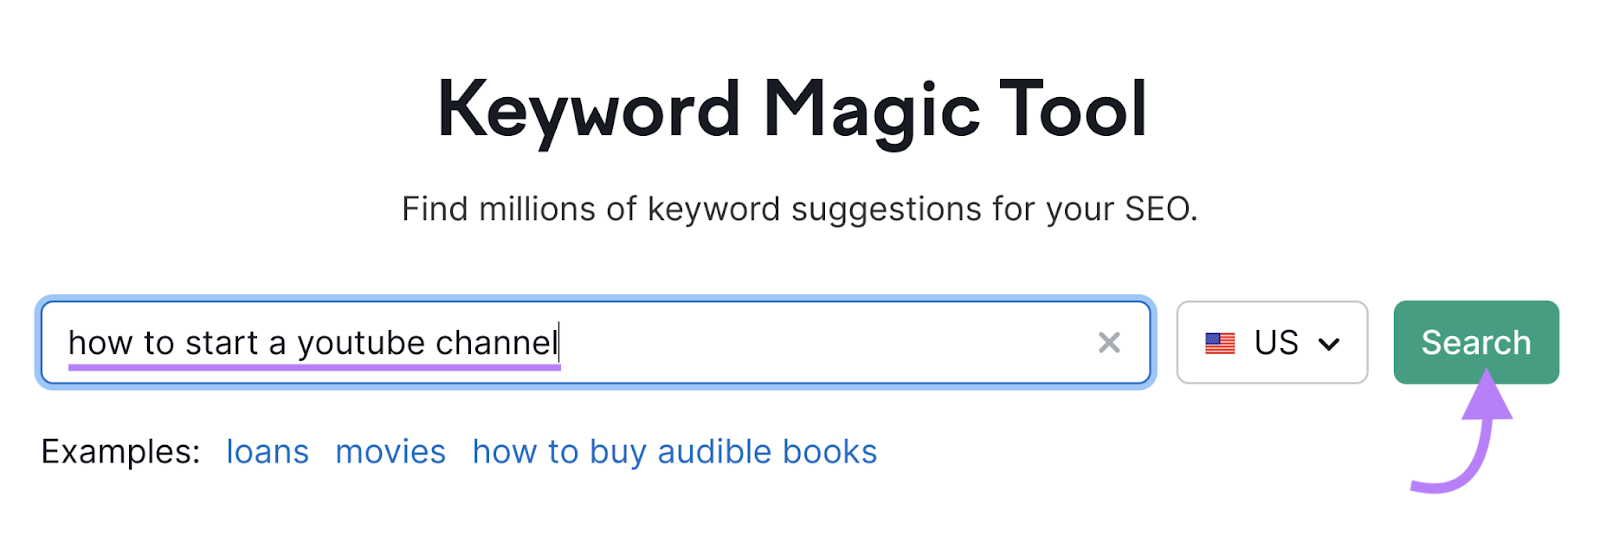 "how to start a youtube channel" entered in Keyword Magic tool search bar